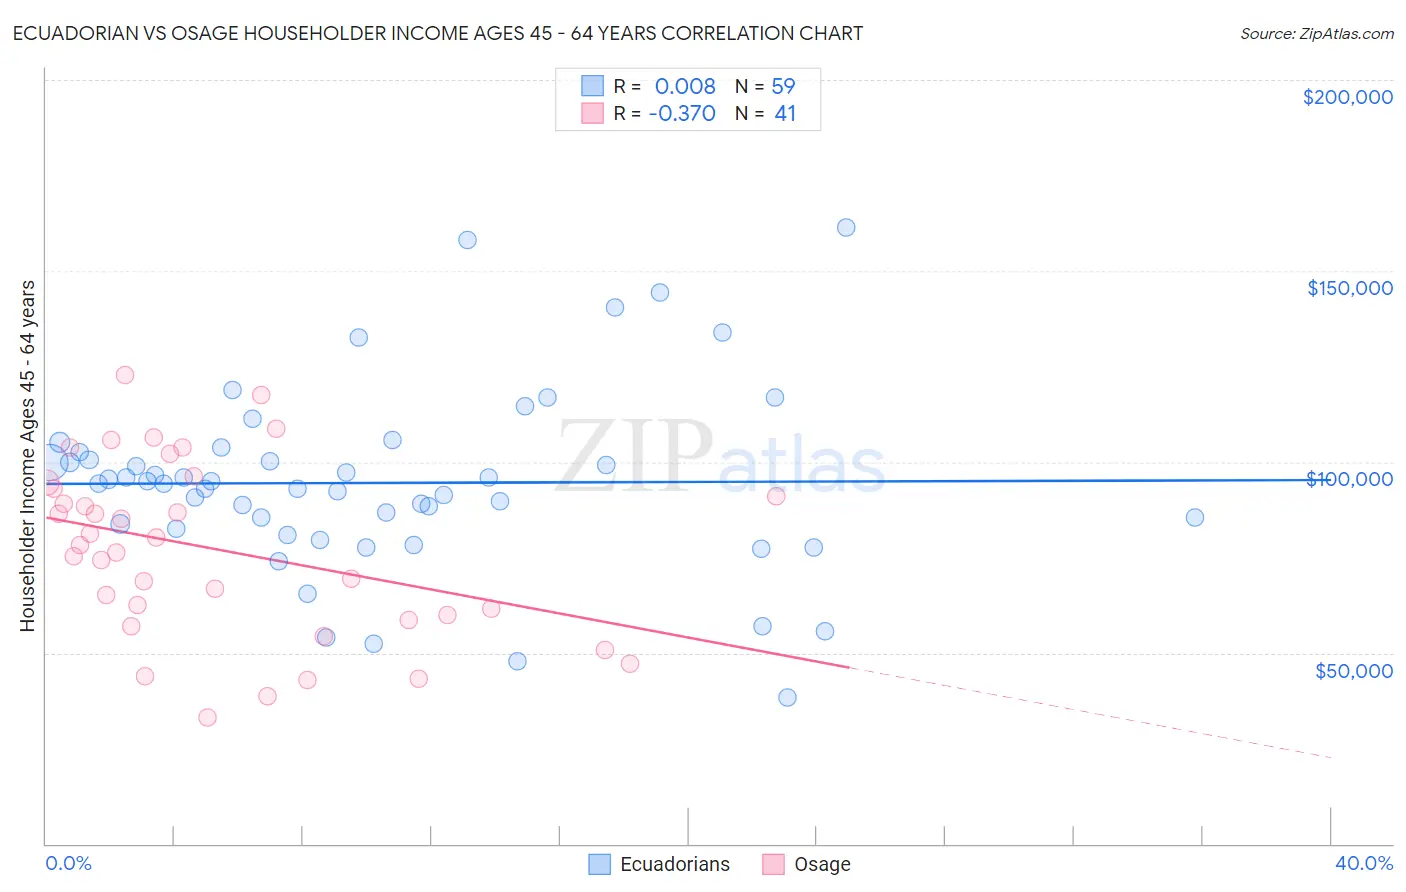 Ecuadorian vs Osage Householder Income Ages 45 - 64 years